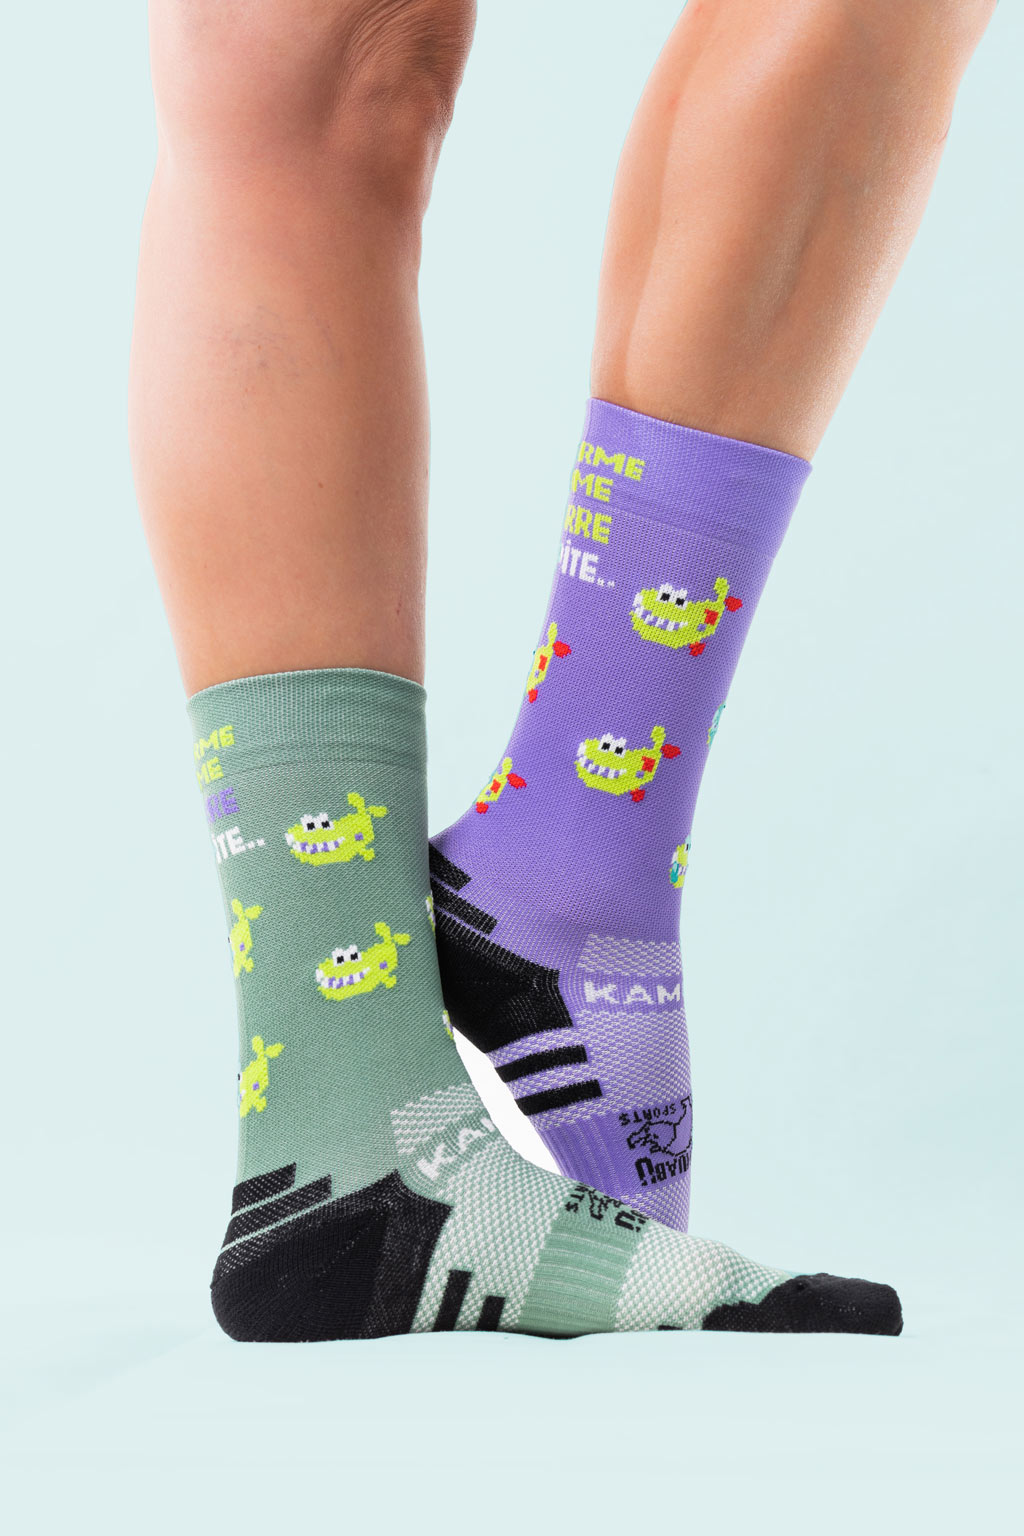 CALCETINES SUSHI color verde de Running (1 HILO) • Kamuabu Sports - Ropa  running, ciclismo y crossfit